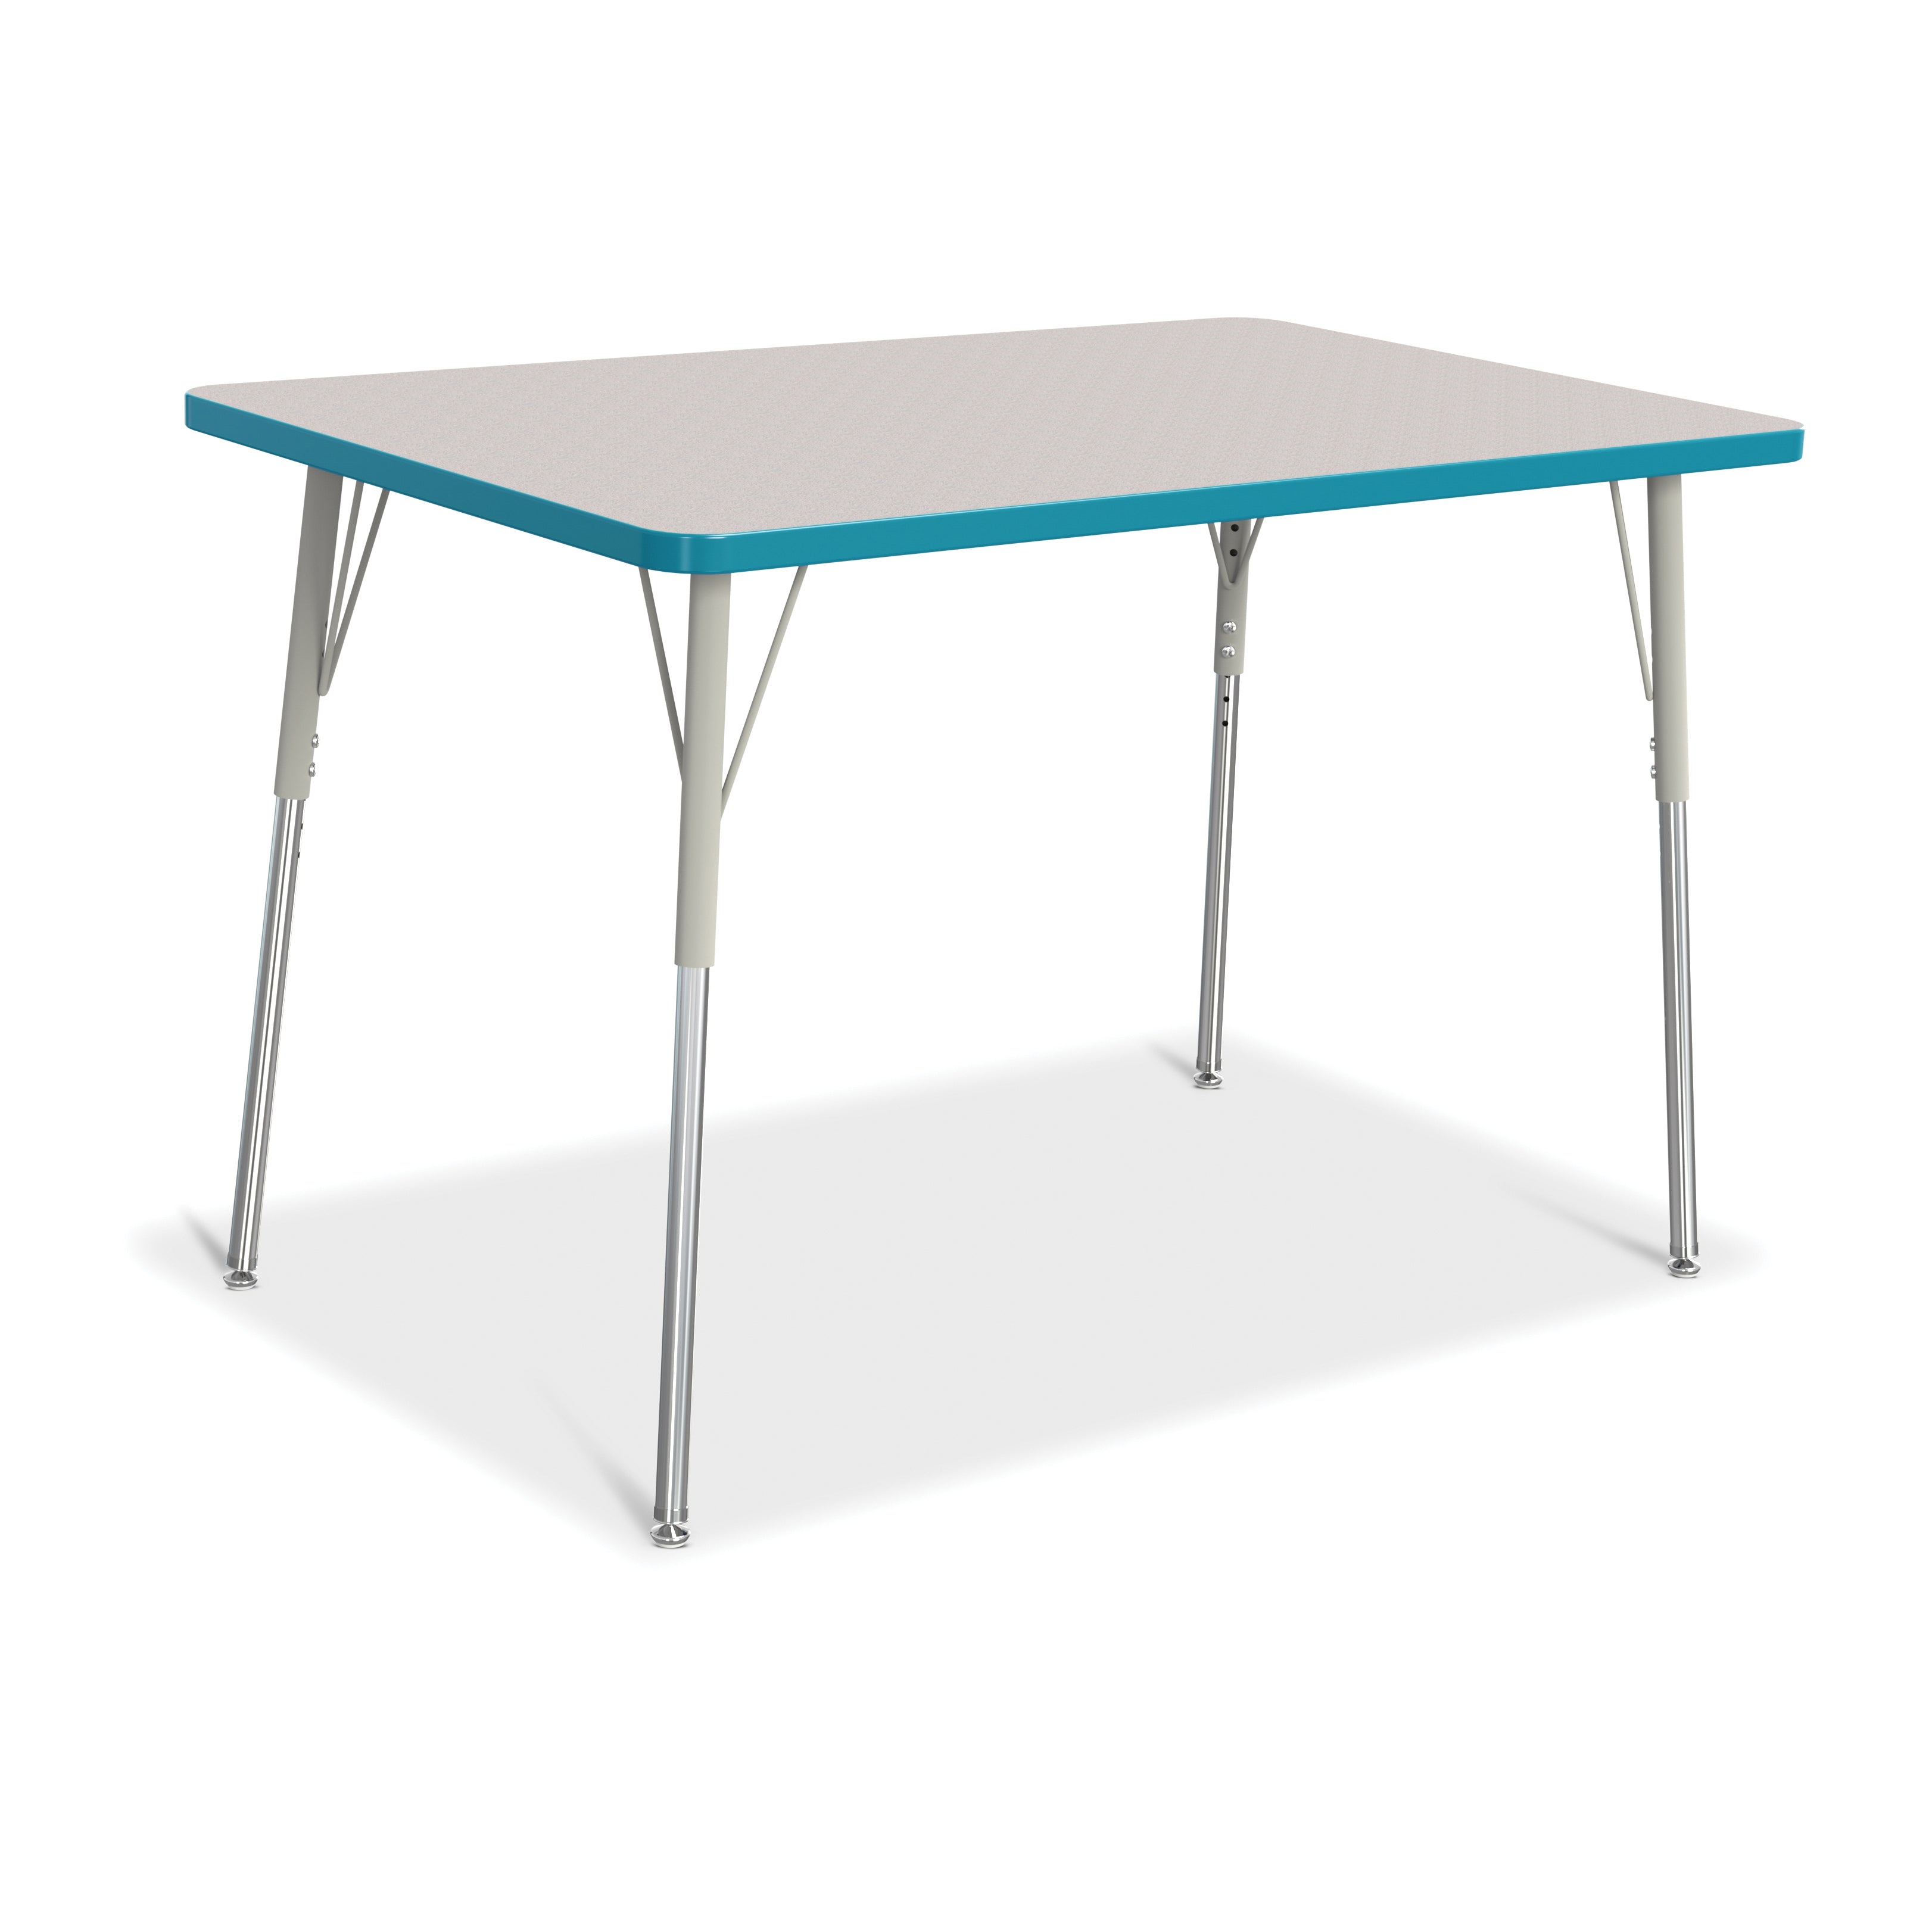 6473JCA005, Berries Rectangle Activity Table - 30" X 48", A-height - Freckled Gray/Teal/Gray